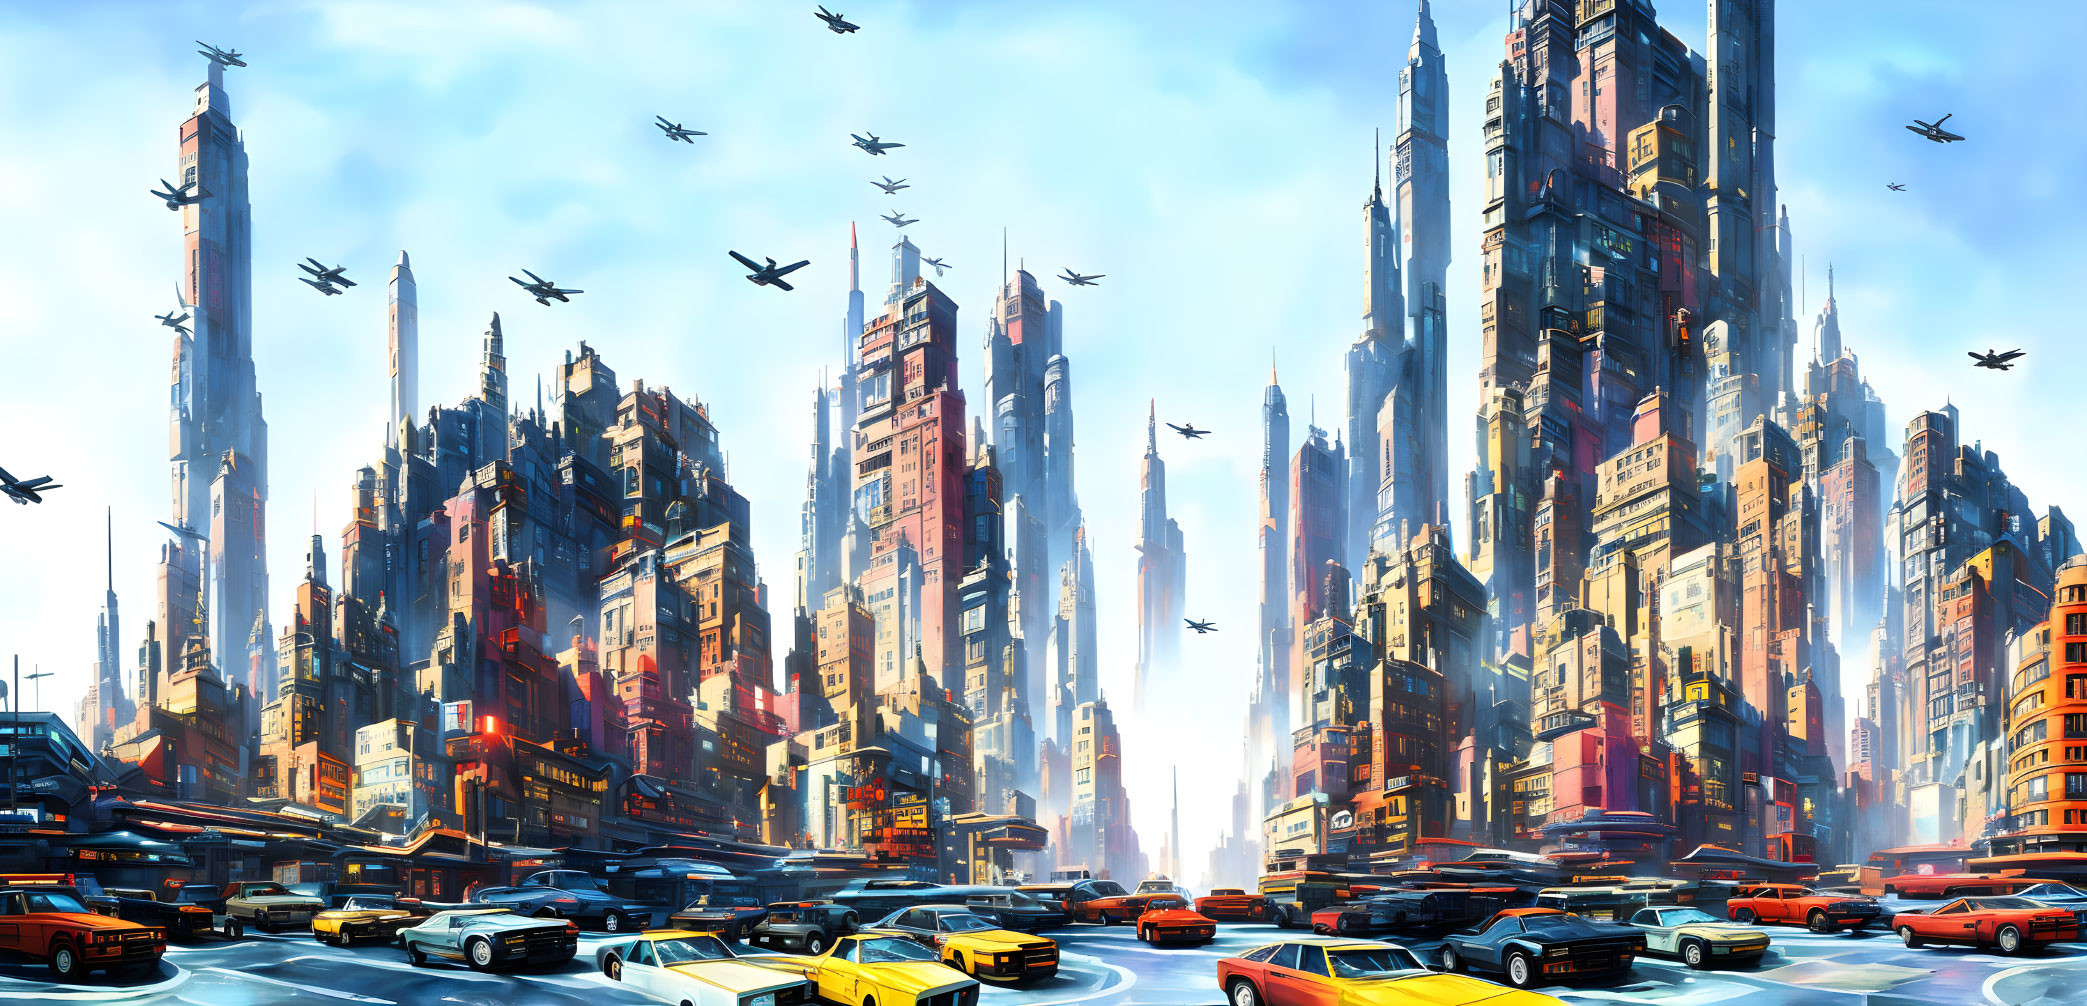 Futuristic cityscape with skyscrapers, flying vehicles, and busy traffic